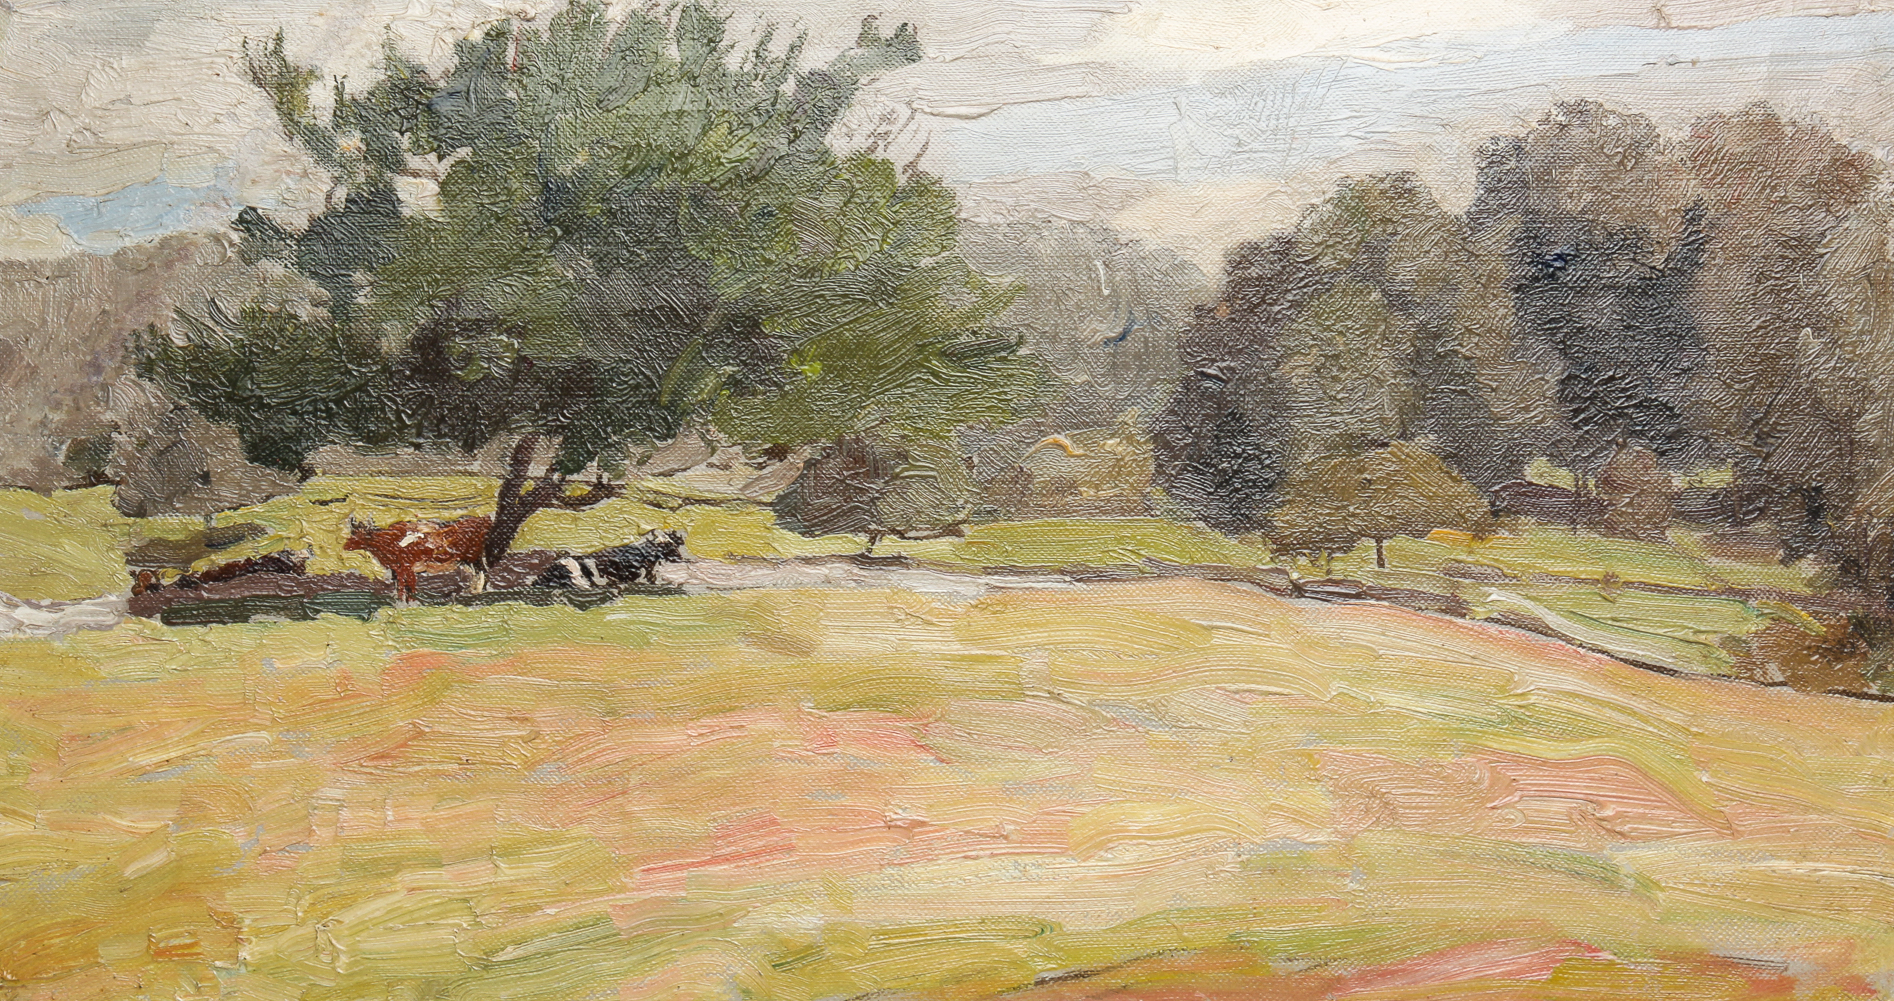 PASTORAL SCENE BY ROBERT BOLLING 2e009a